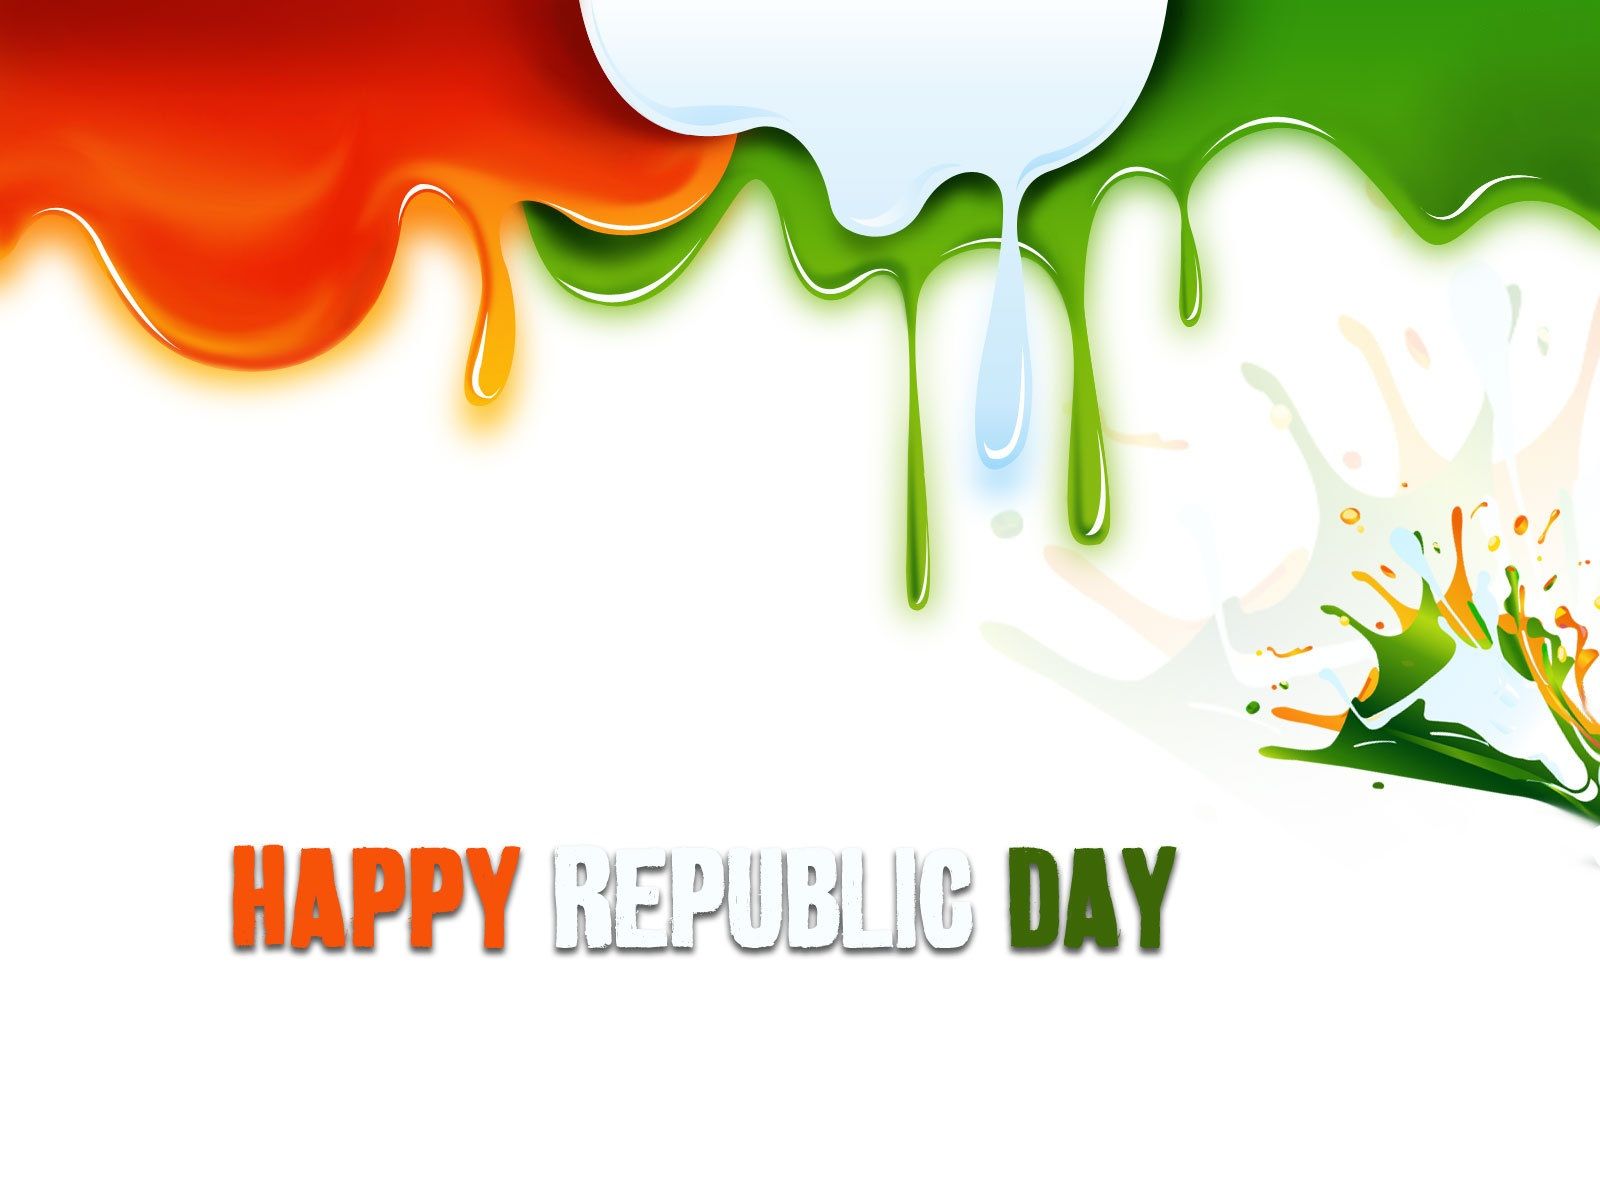 Happy Republic Day 2018 Image Wishes Quotes Poems The Republic Day is a national holiday of Indi. Republic day, Republic day india, Happy independence day status